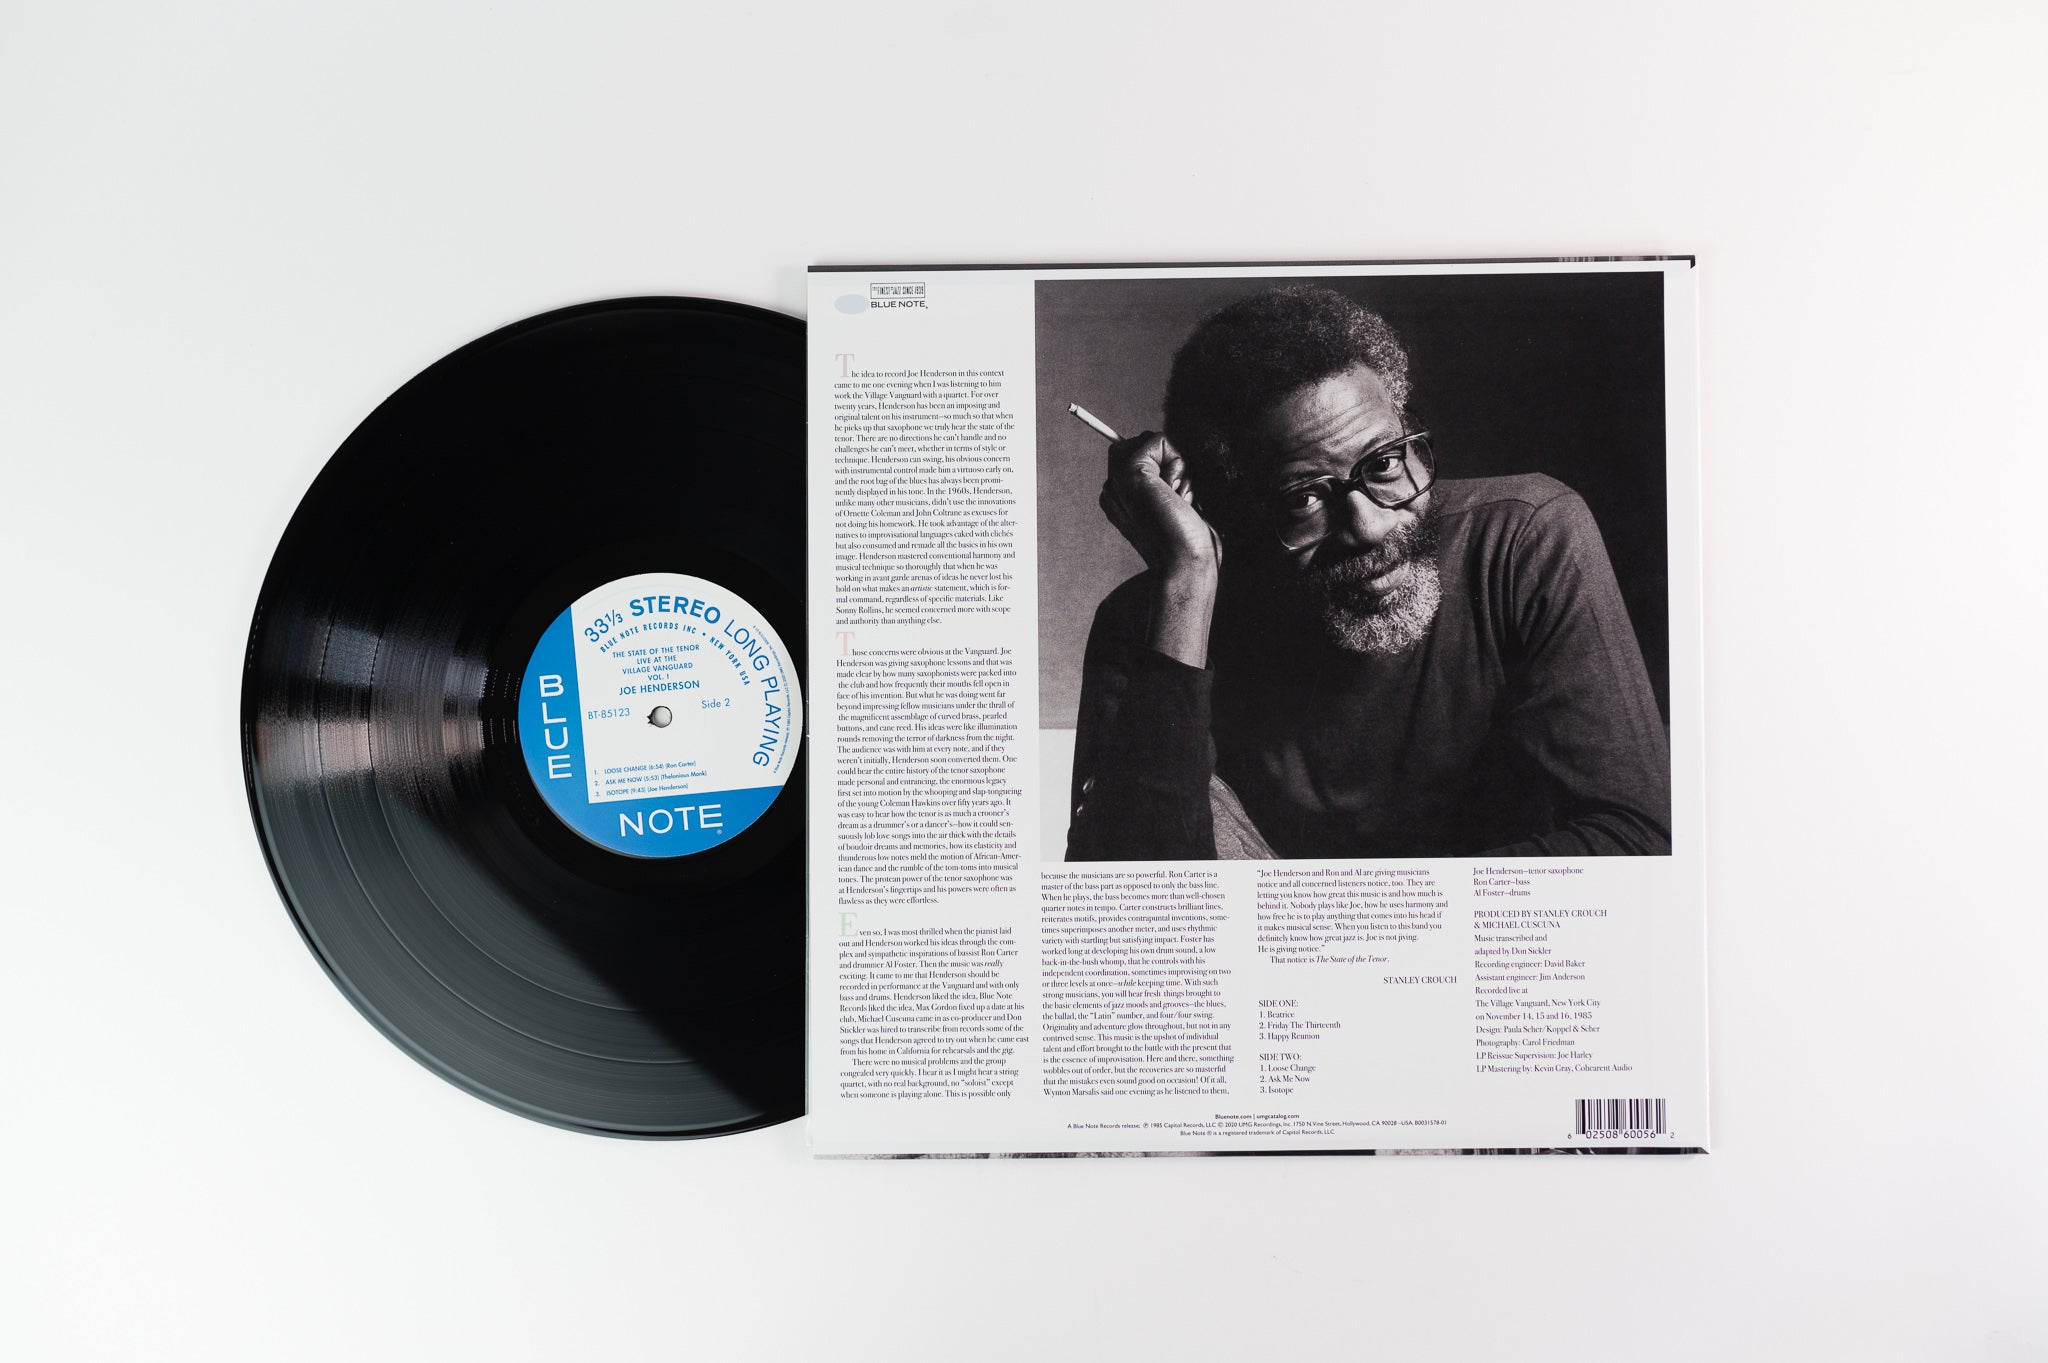 Joe Henderson - The State Of The Tenor (Live At The Village Vanguard Volume 1) on Blue Note Tone Poet Series Reissue